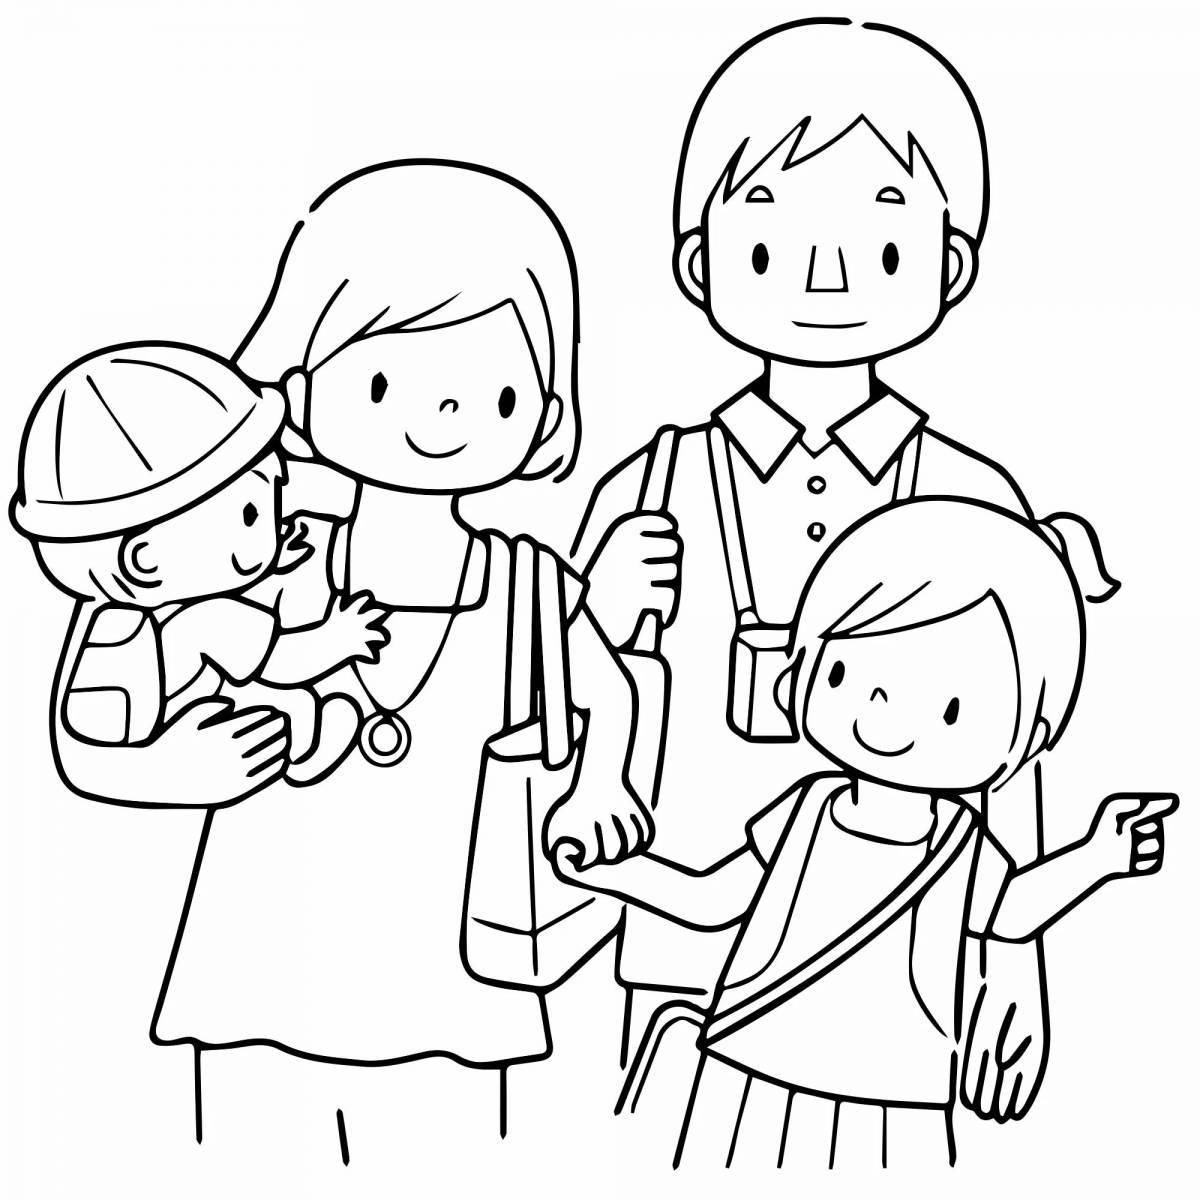 Playful family coloring book for kids